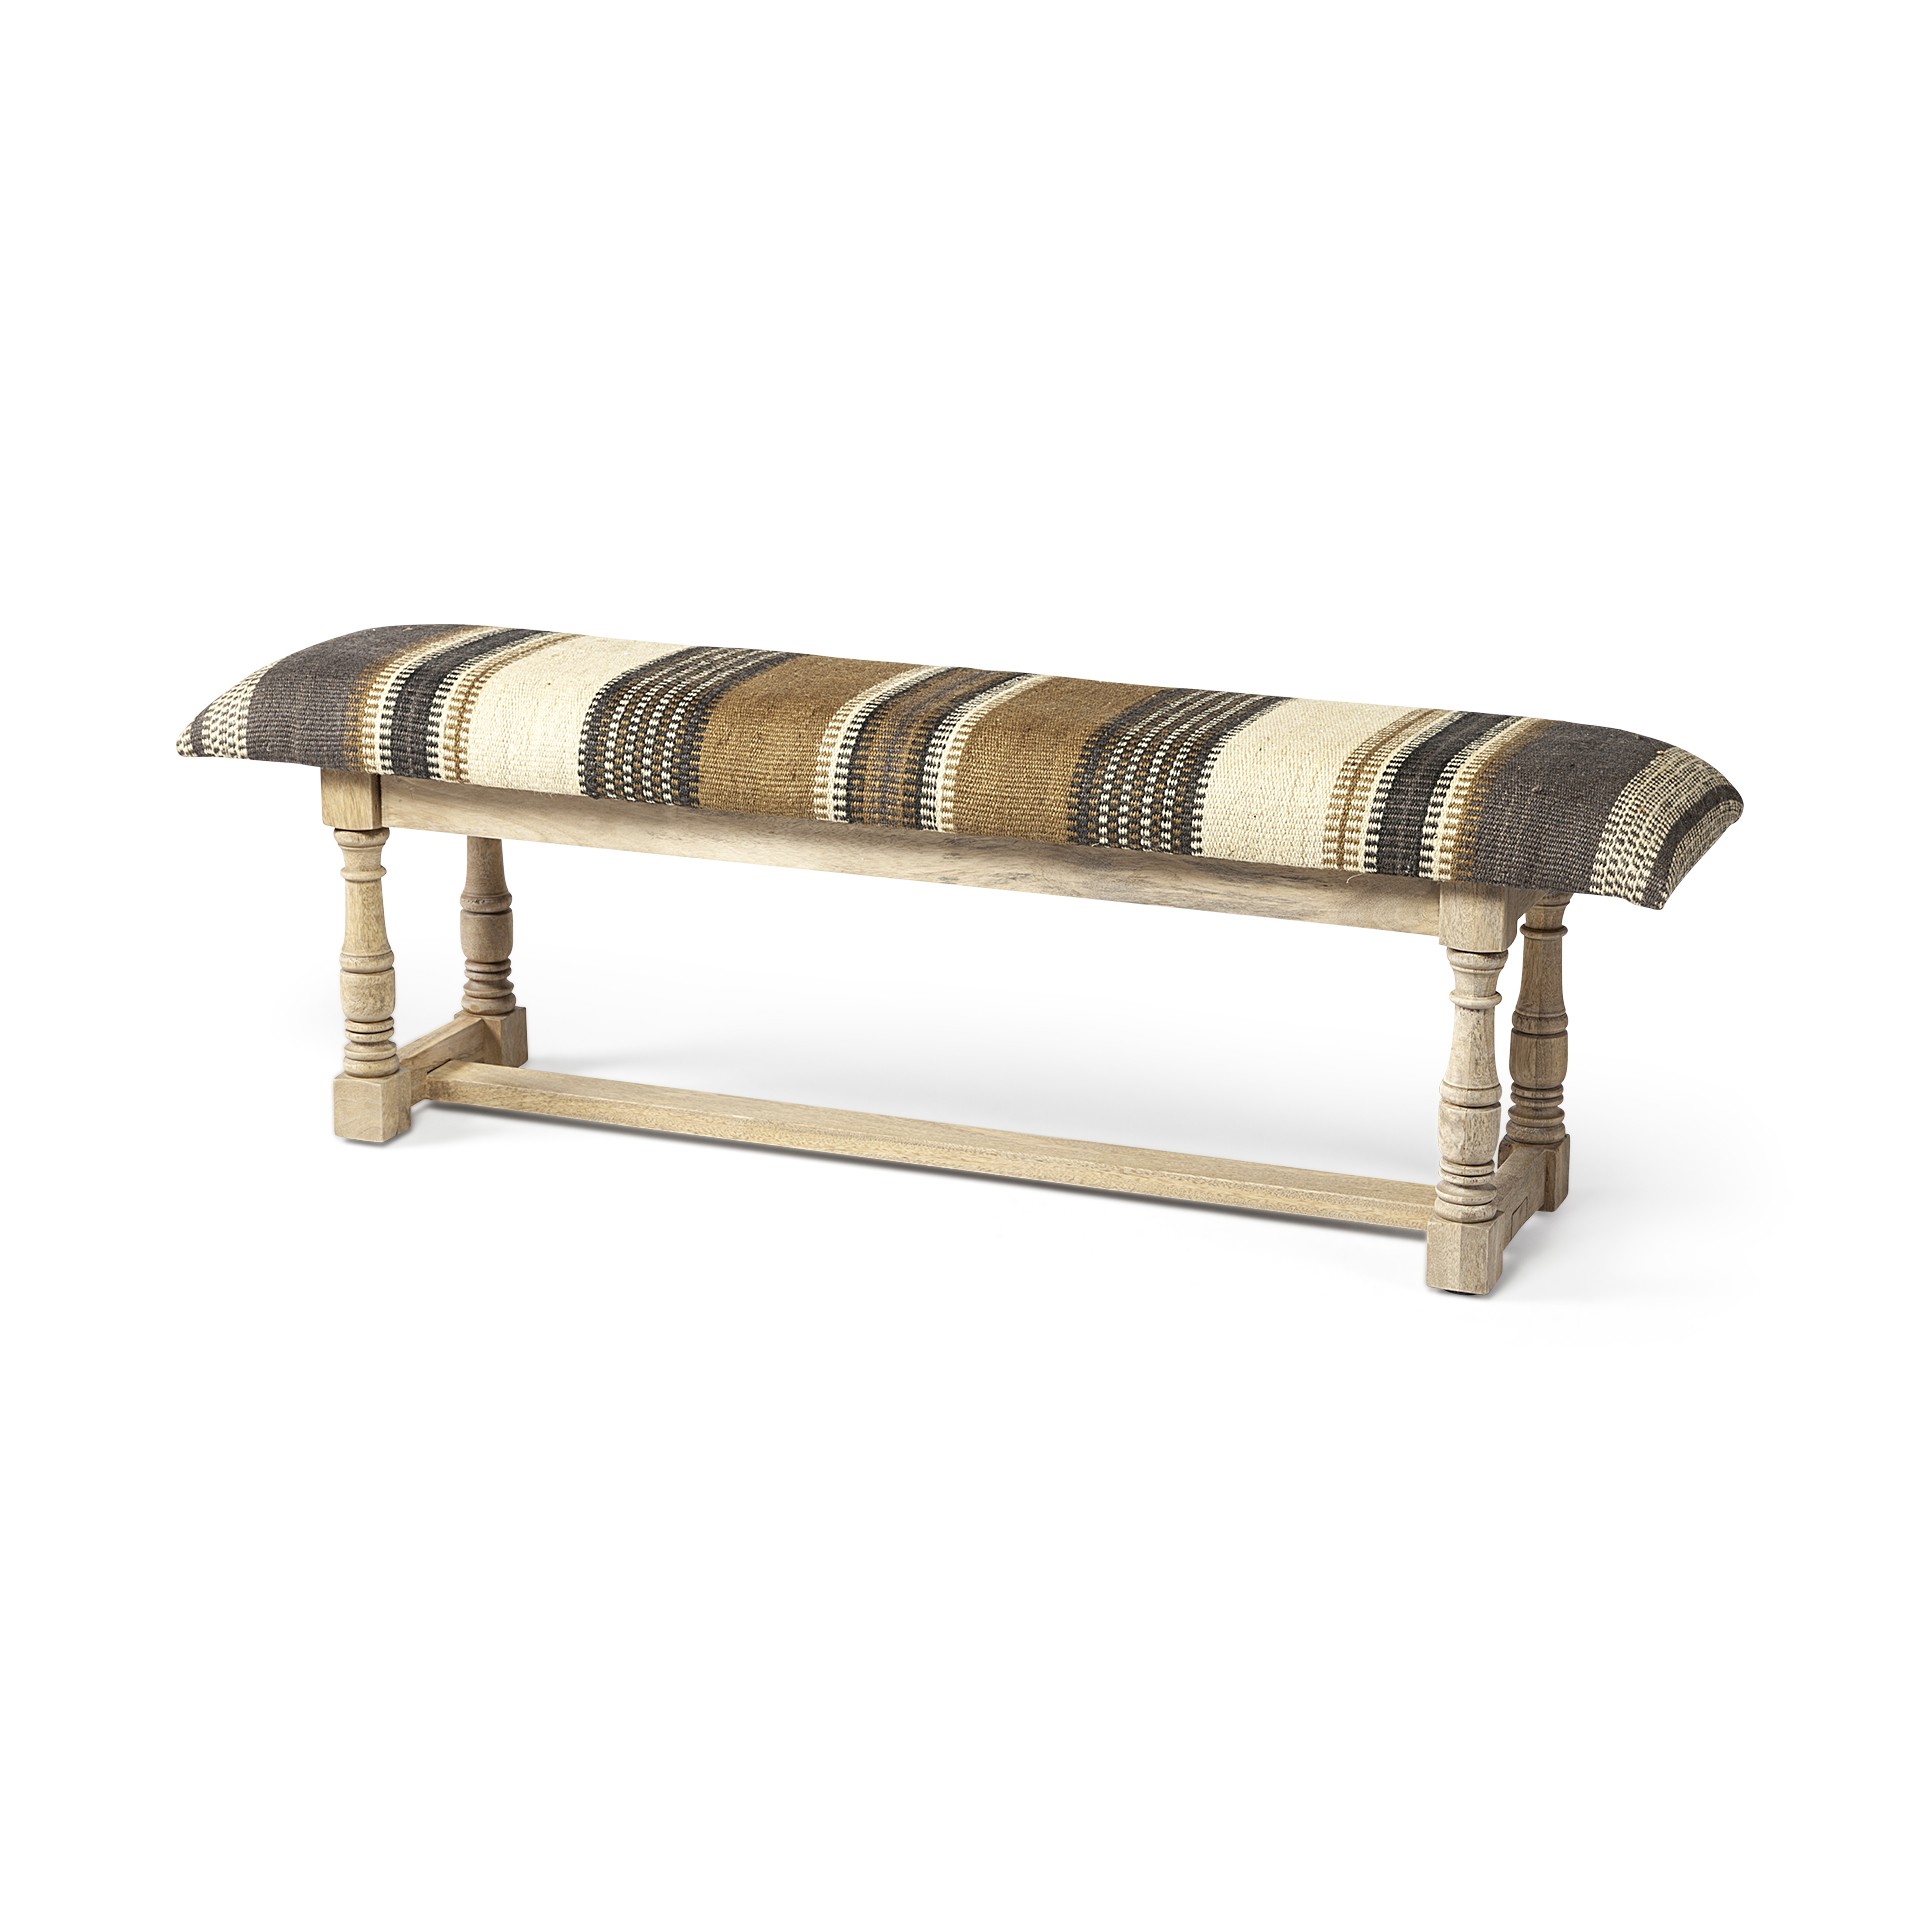 Rectangular Mango Wood Olive and Brown Upholstered Accent Bench